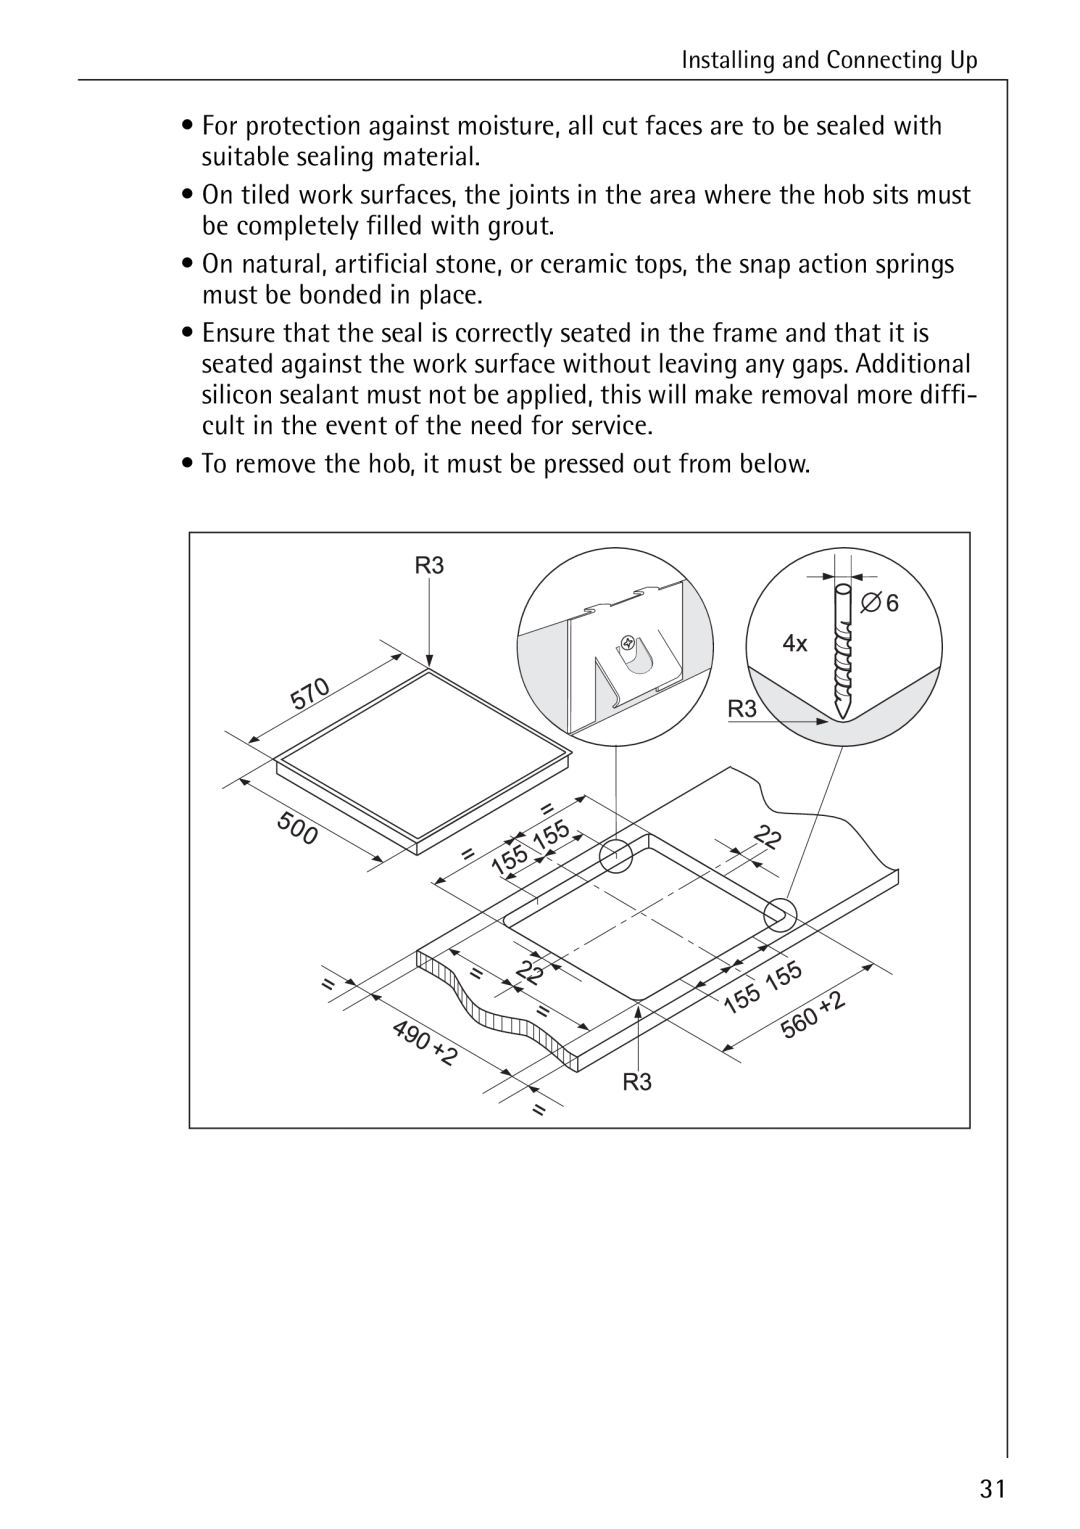 Electrolux 6500 K manual For protection against moisture, all cut faces are to be sealed with suitable sealing material 